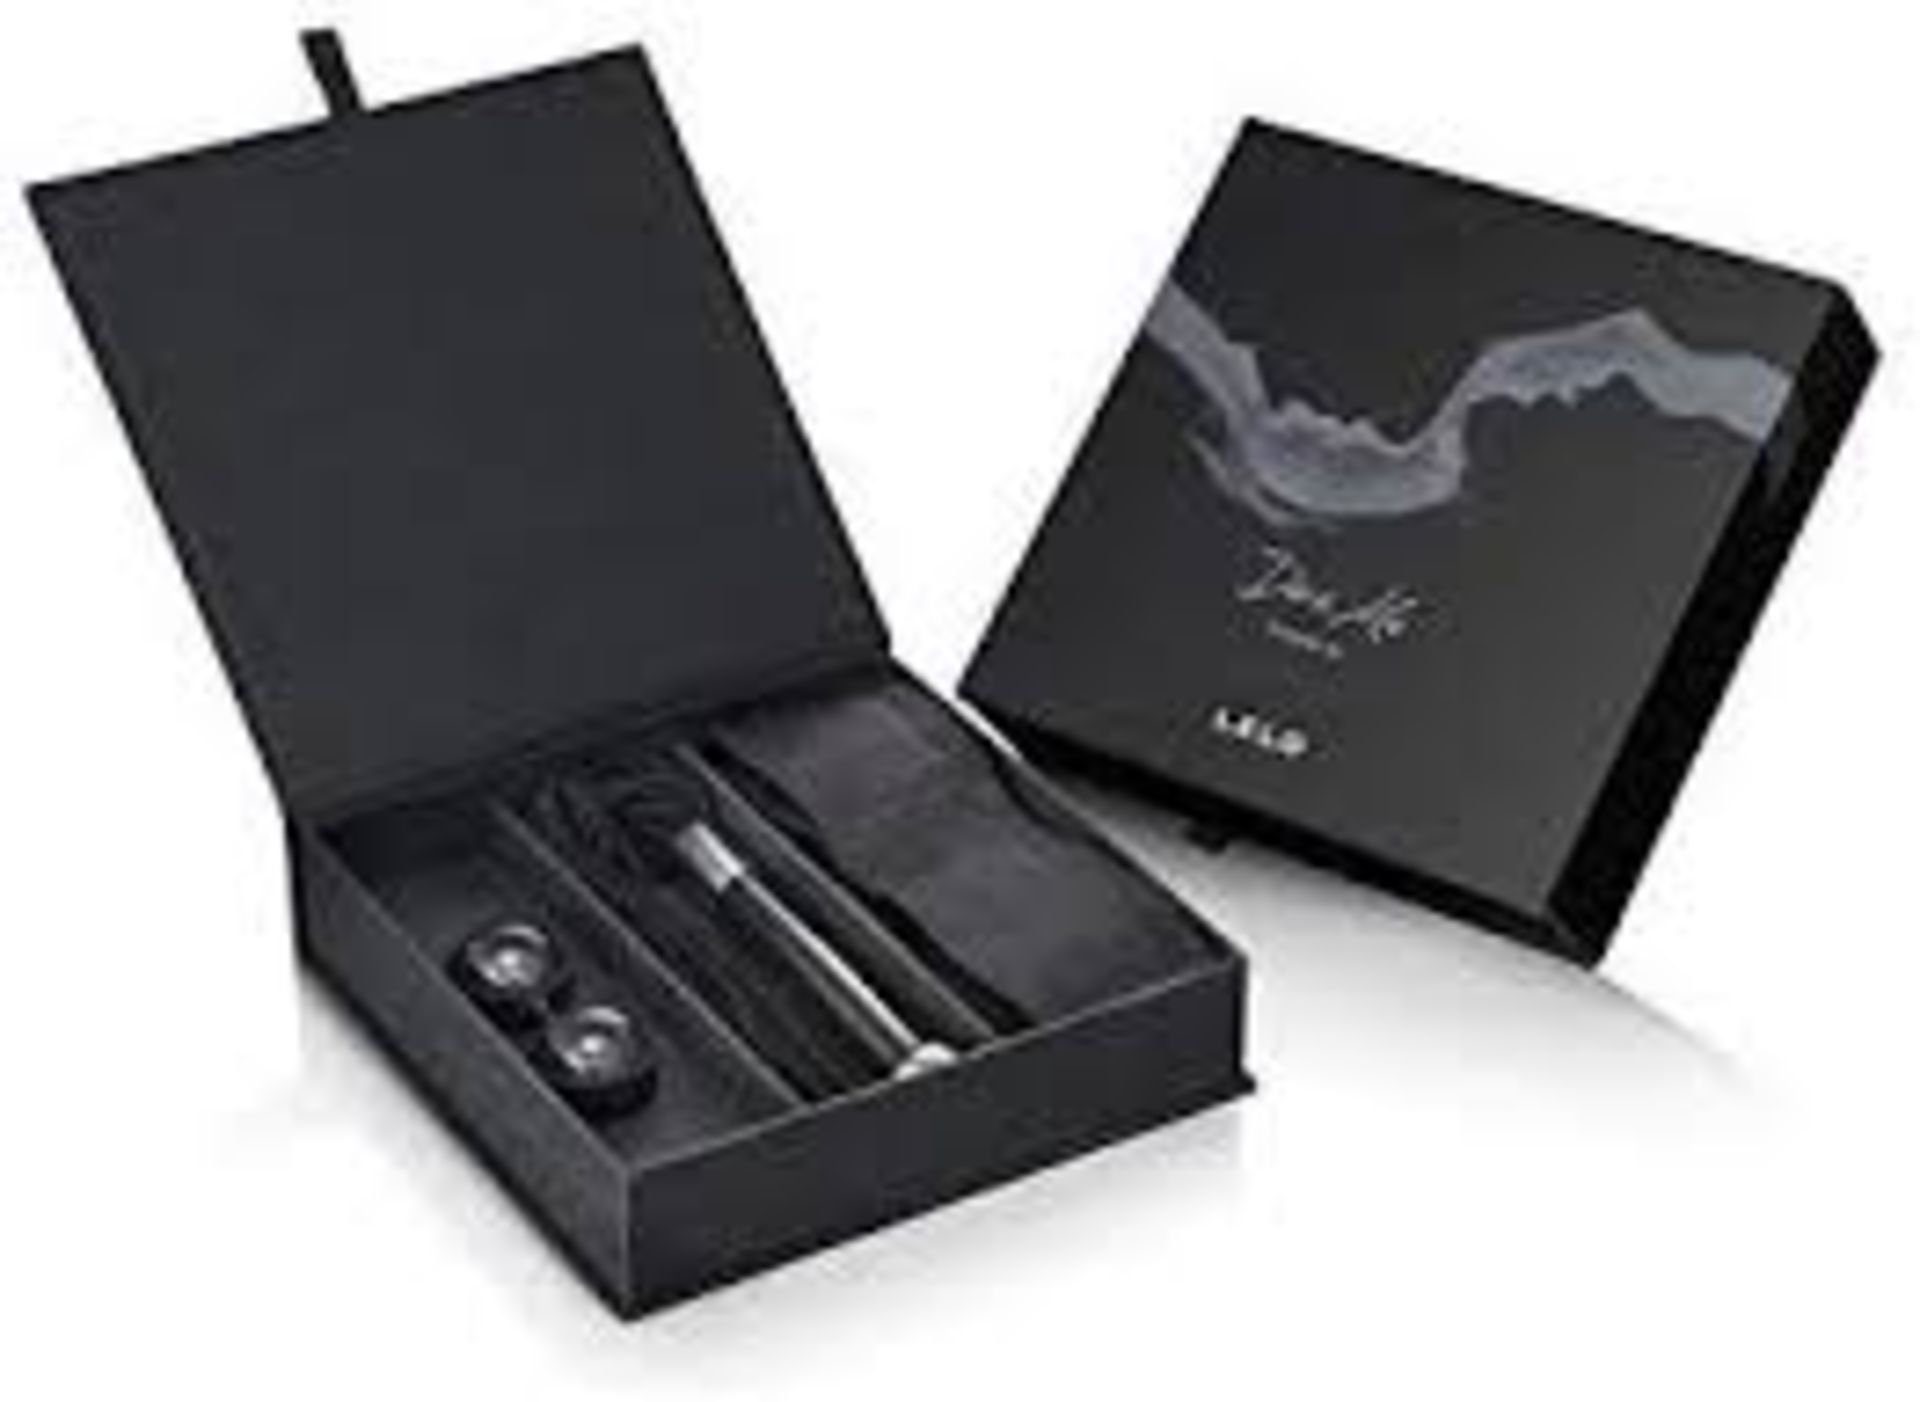 Boxed Dare Me Lelo Pleasure Set RRP £170 (Appraisals Are Available Upon Request)(Pictures Are For